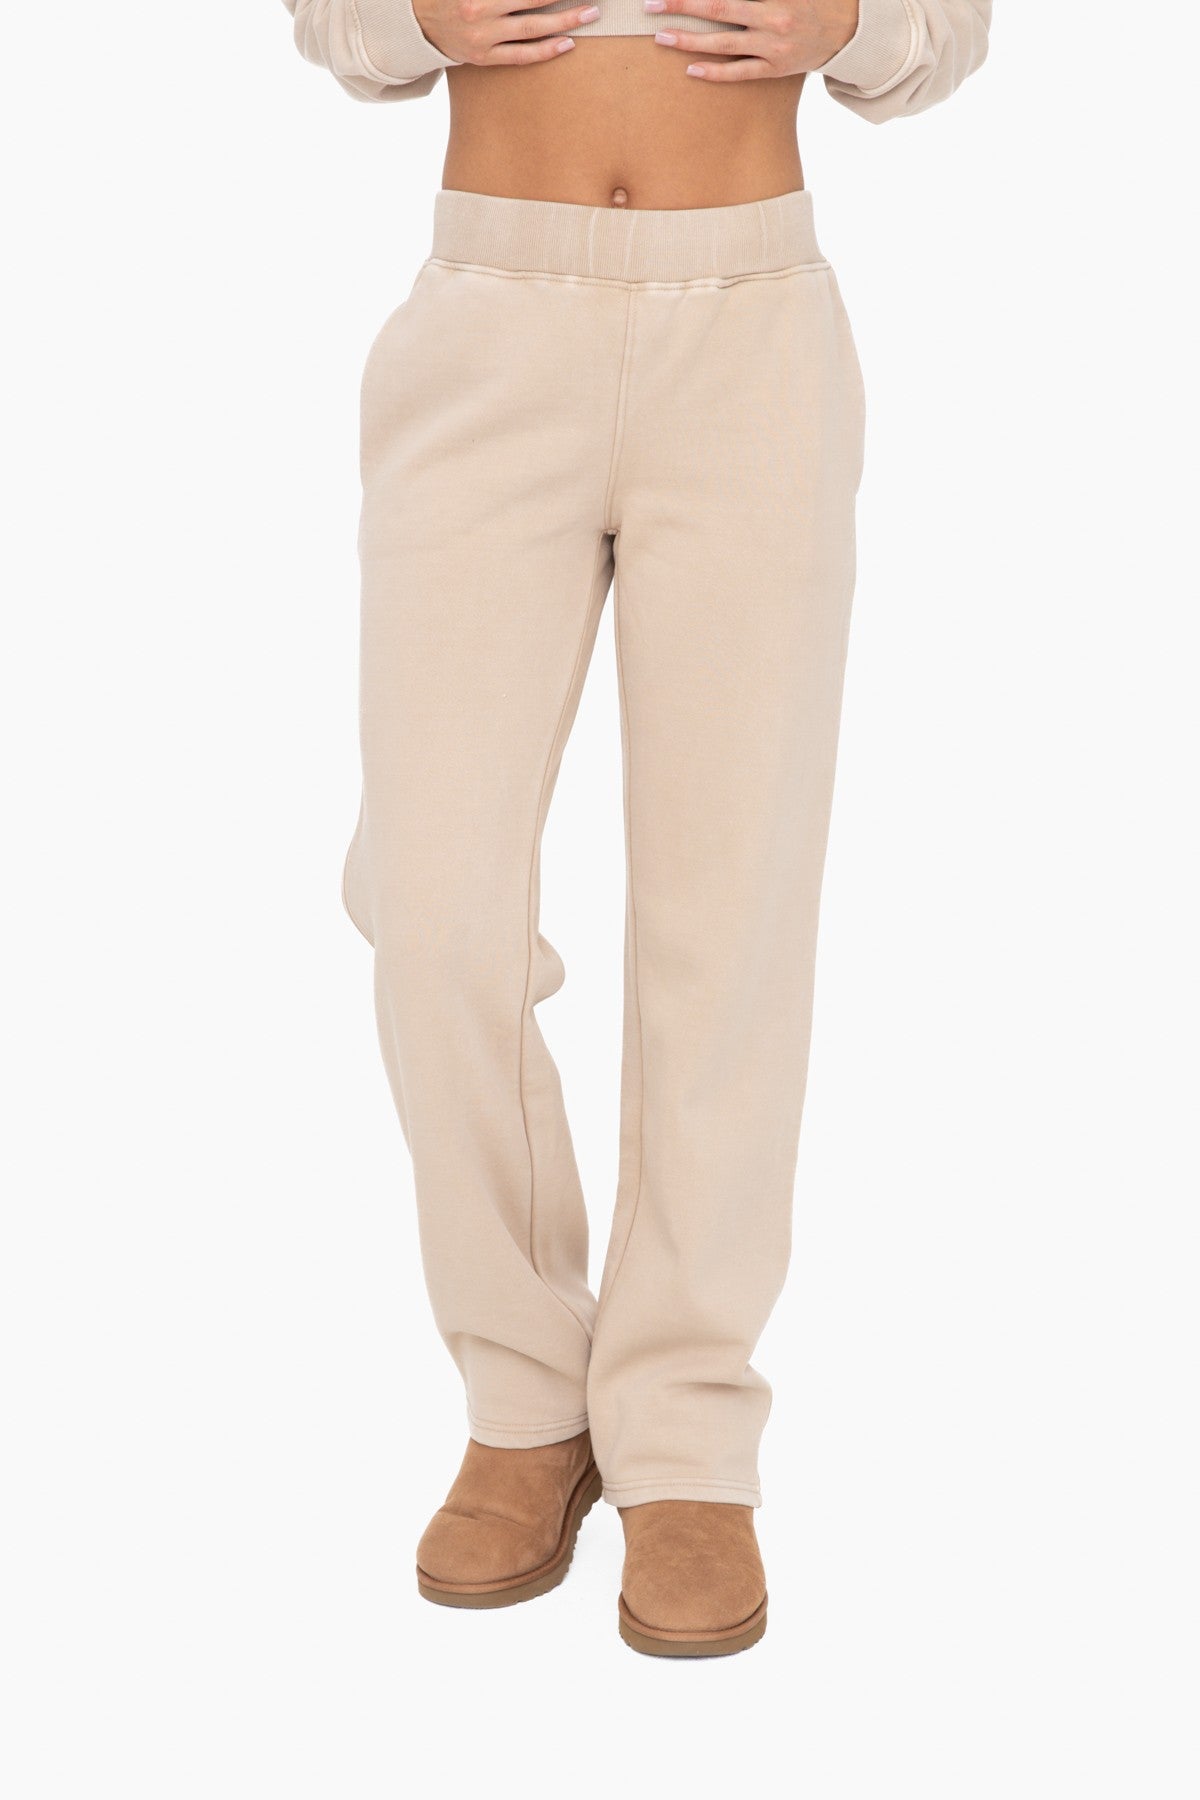 Vintage Lounge Pants in Taupe